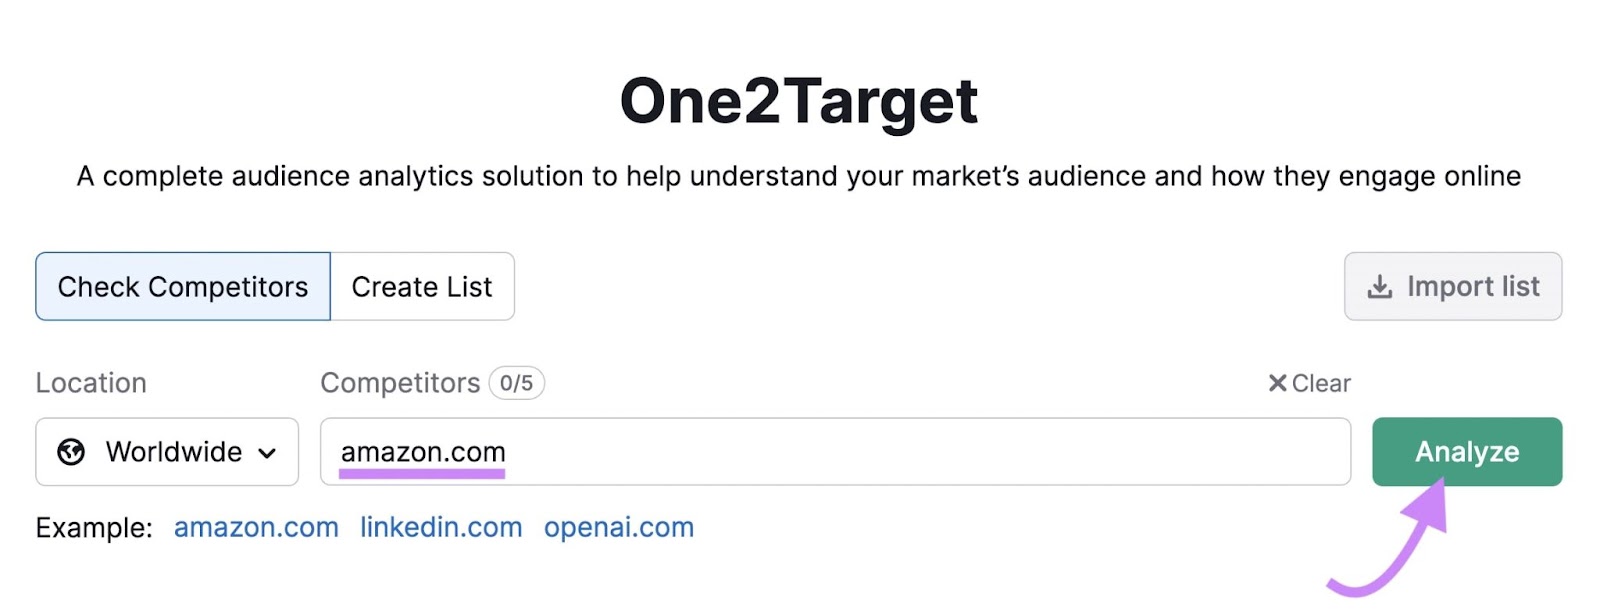 "amazon.com" entered into the One2Target search bar